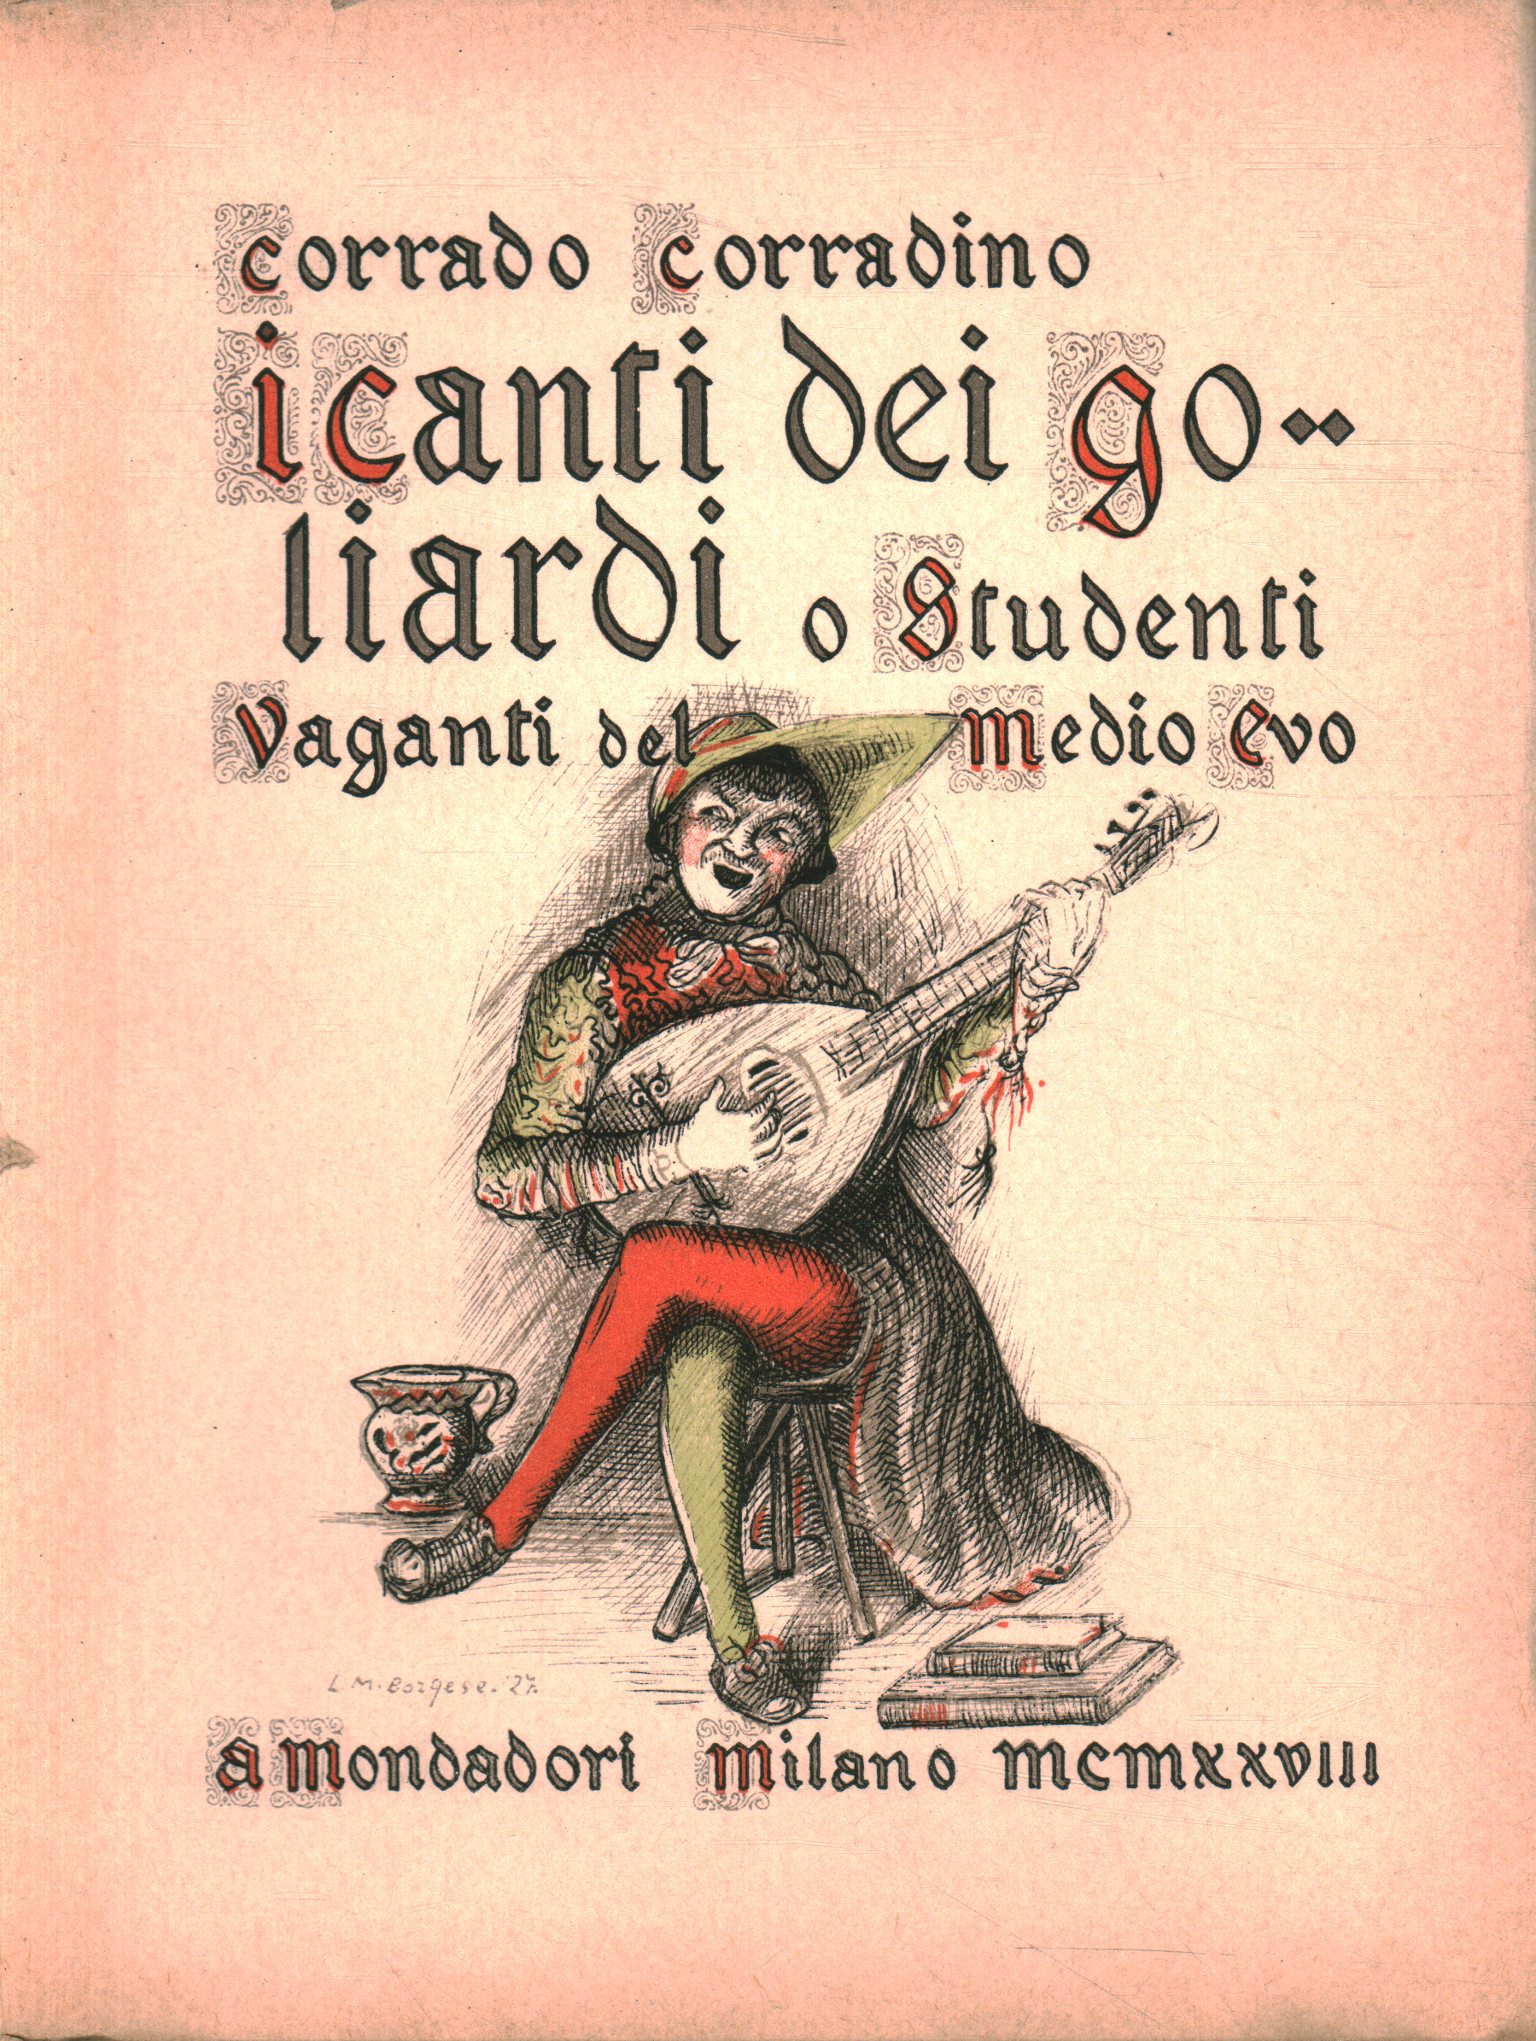 The songs of the Goliardi or vagant students